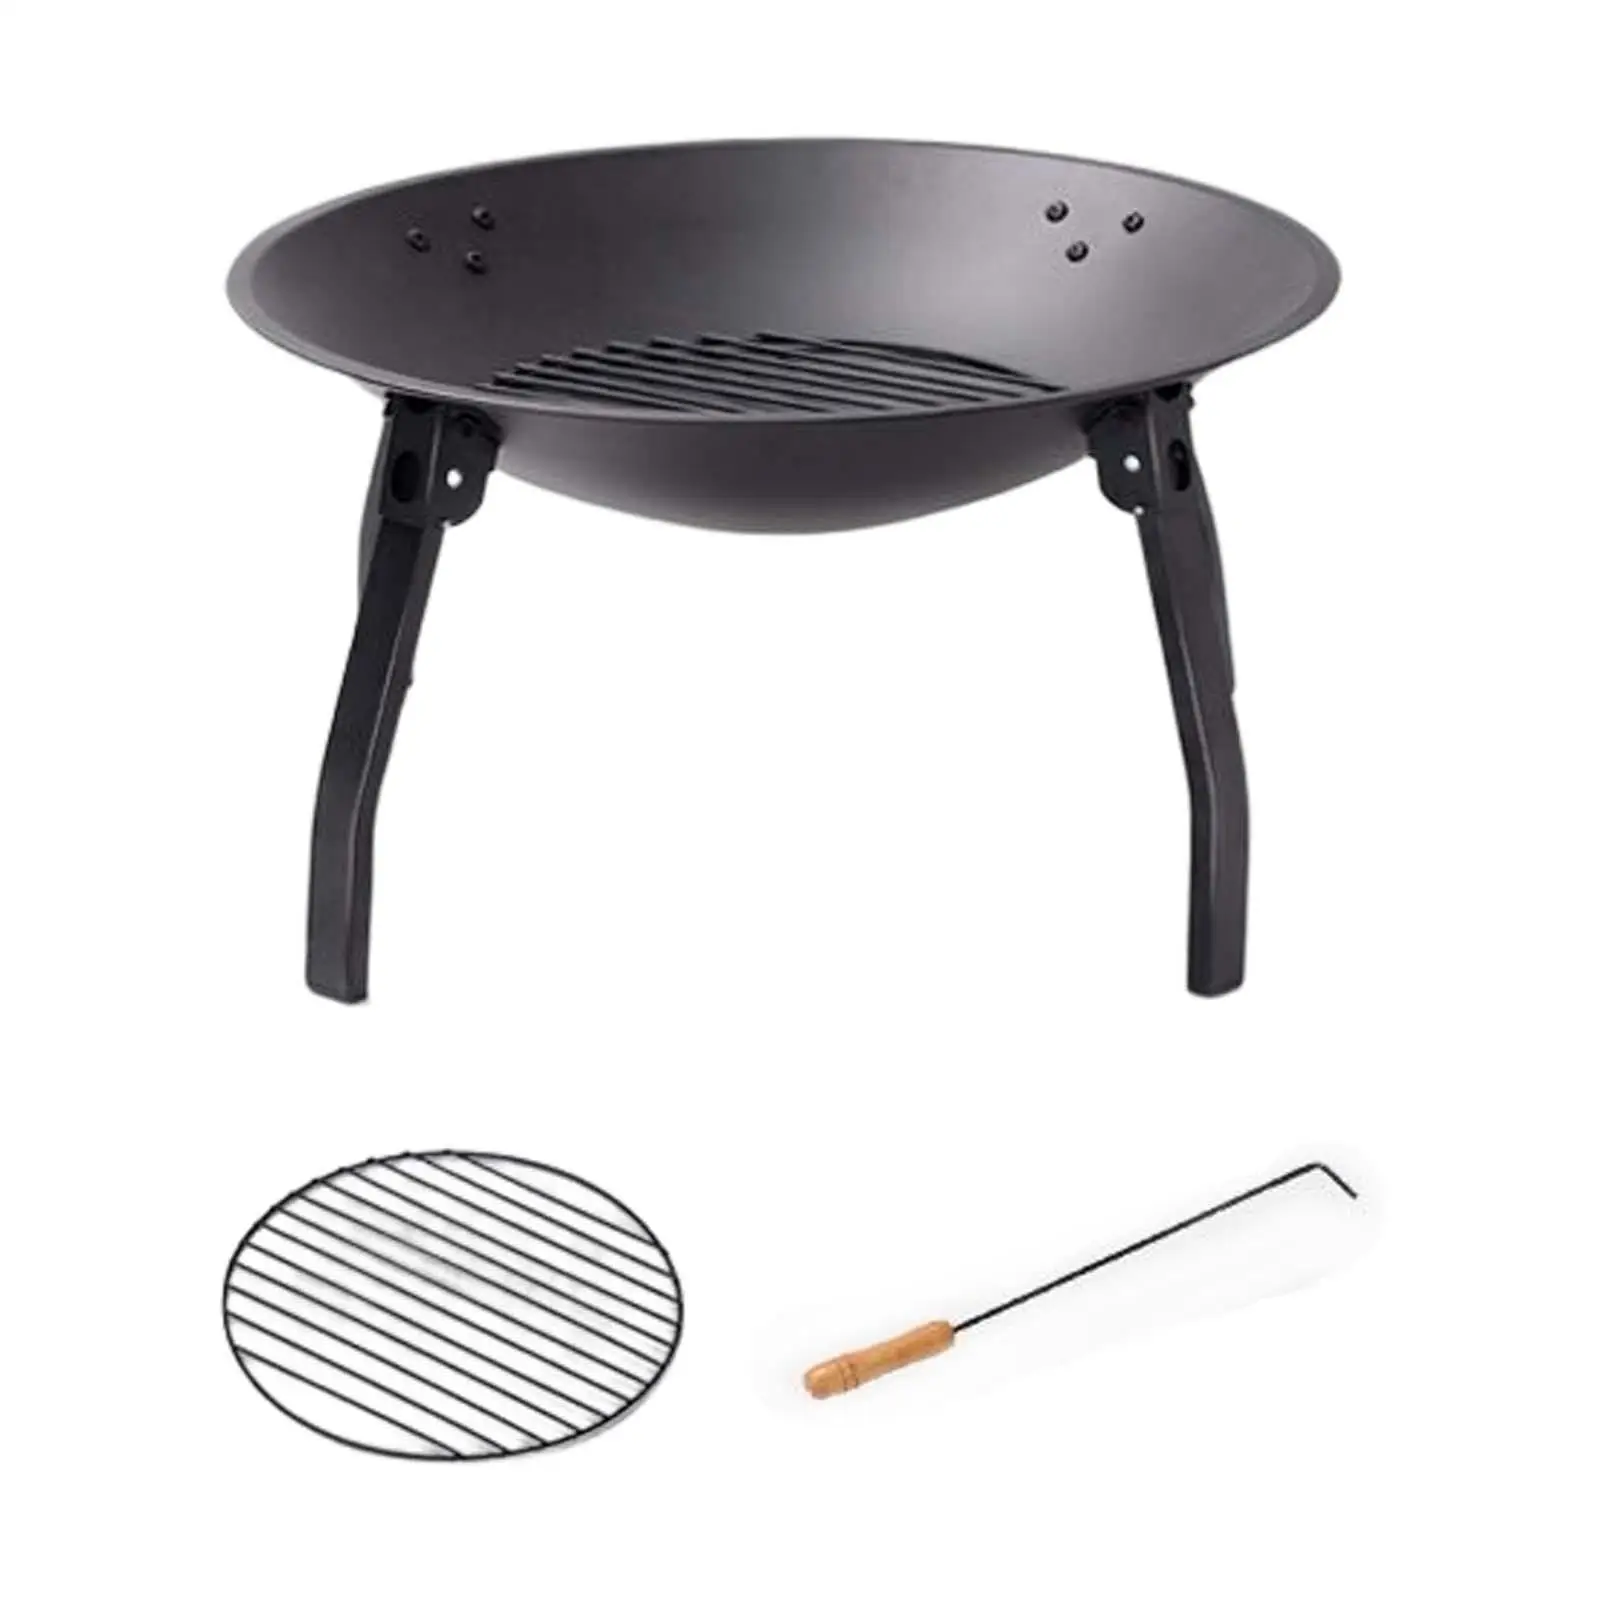 Creative Portable Outdoor Brazier Foldable  Cooking Utensil Firepit Garden Fireplace for Patio Porch Deck Backyard Barbecue